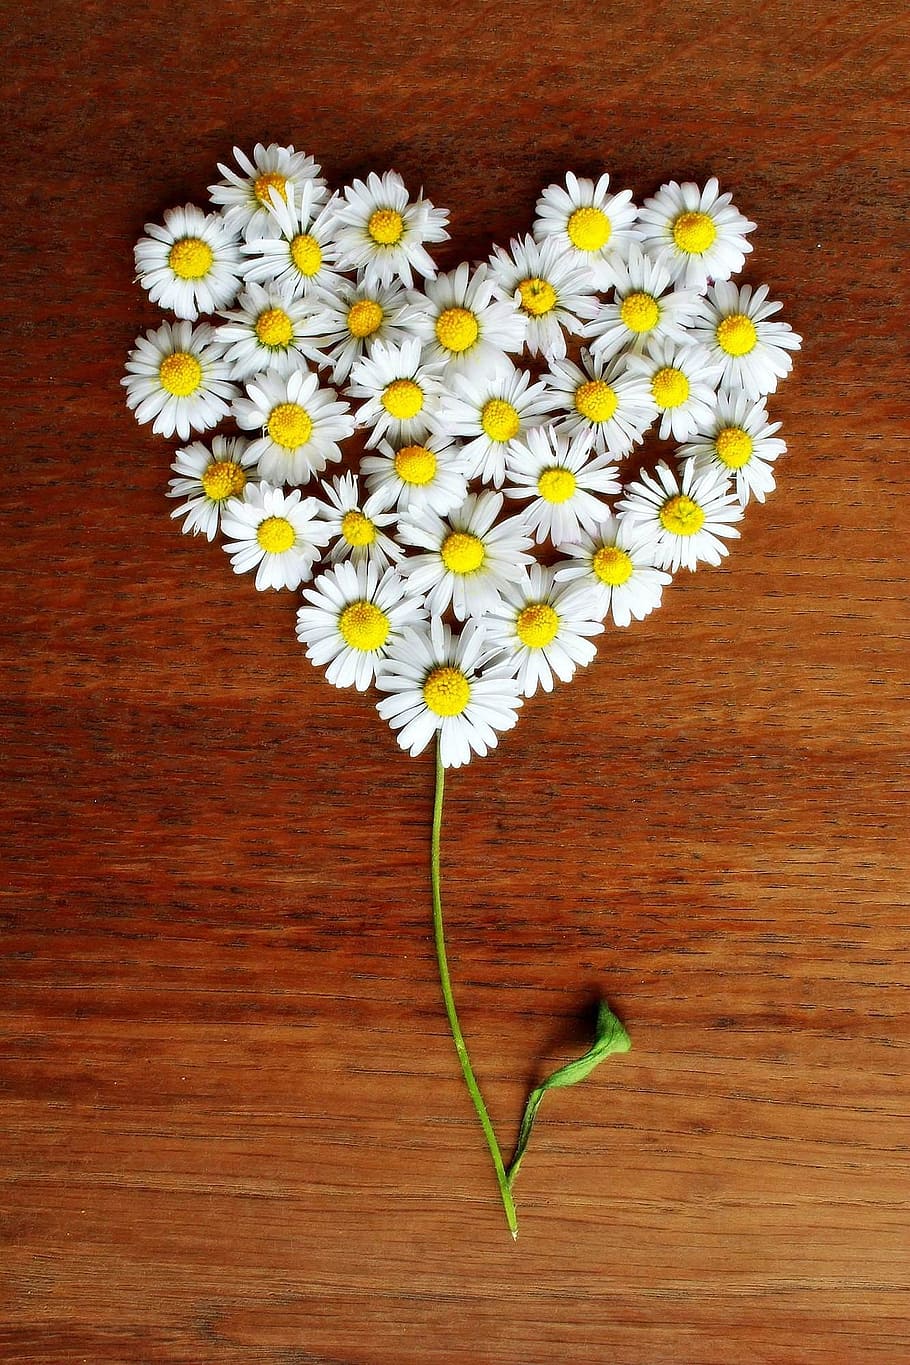 close, white, petaled flowers, forming, heart, daisy, flowers, surface, daisy heart, love